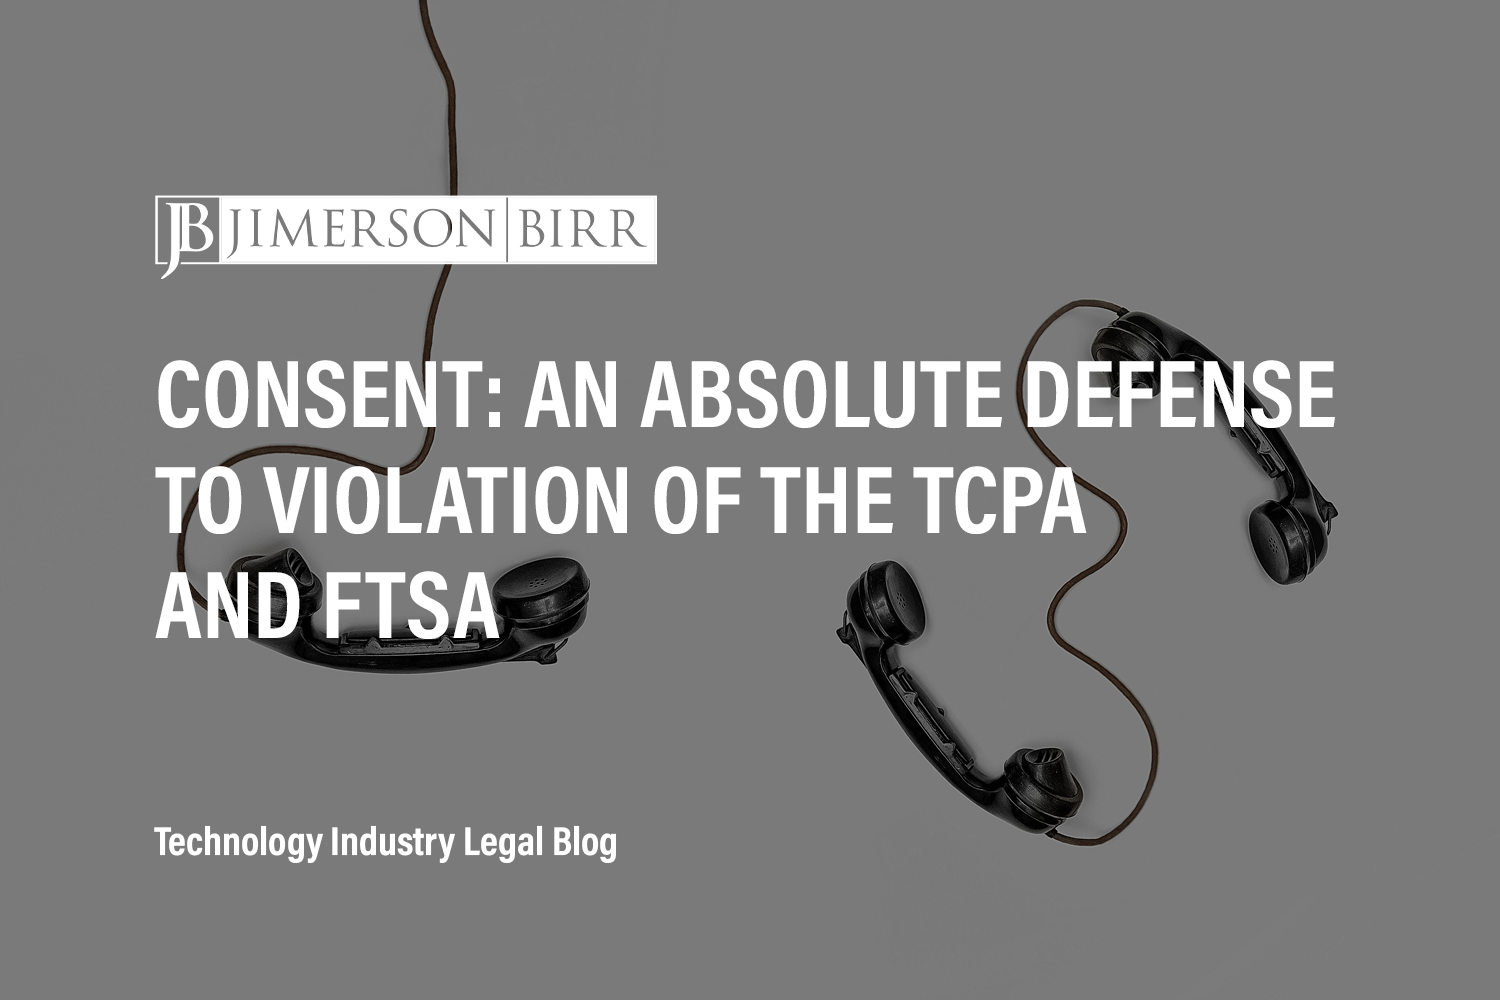 Consent: An Absolute Defense to Violation of the Telephone Consumer Protection Act and Florida Telephone Solicitation Act